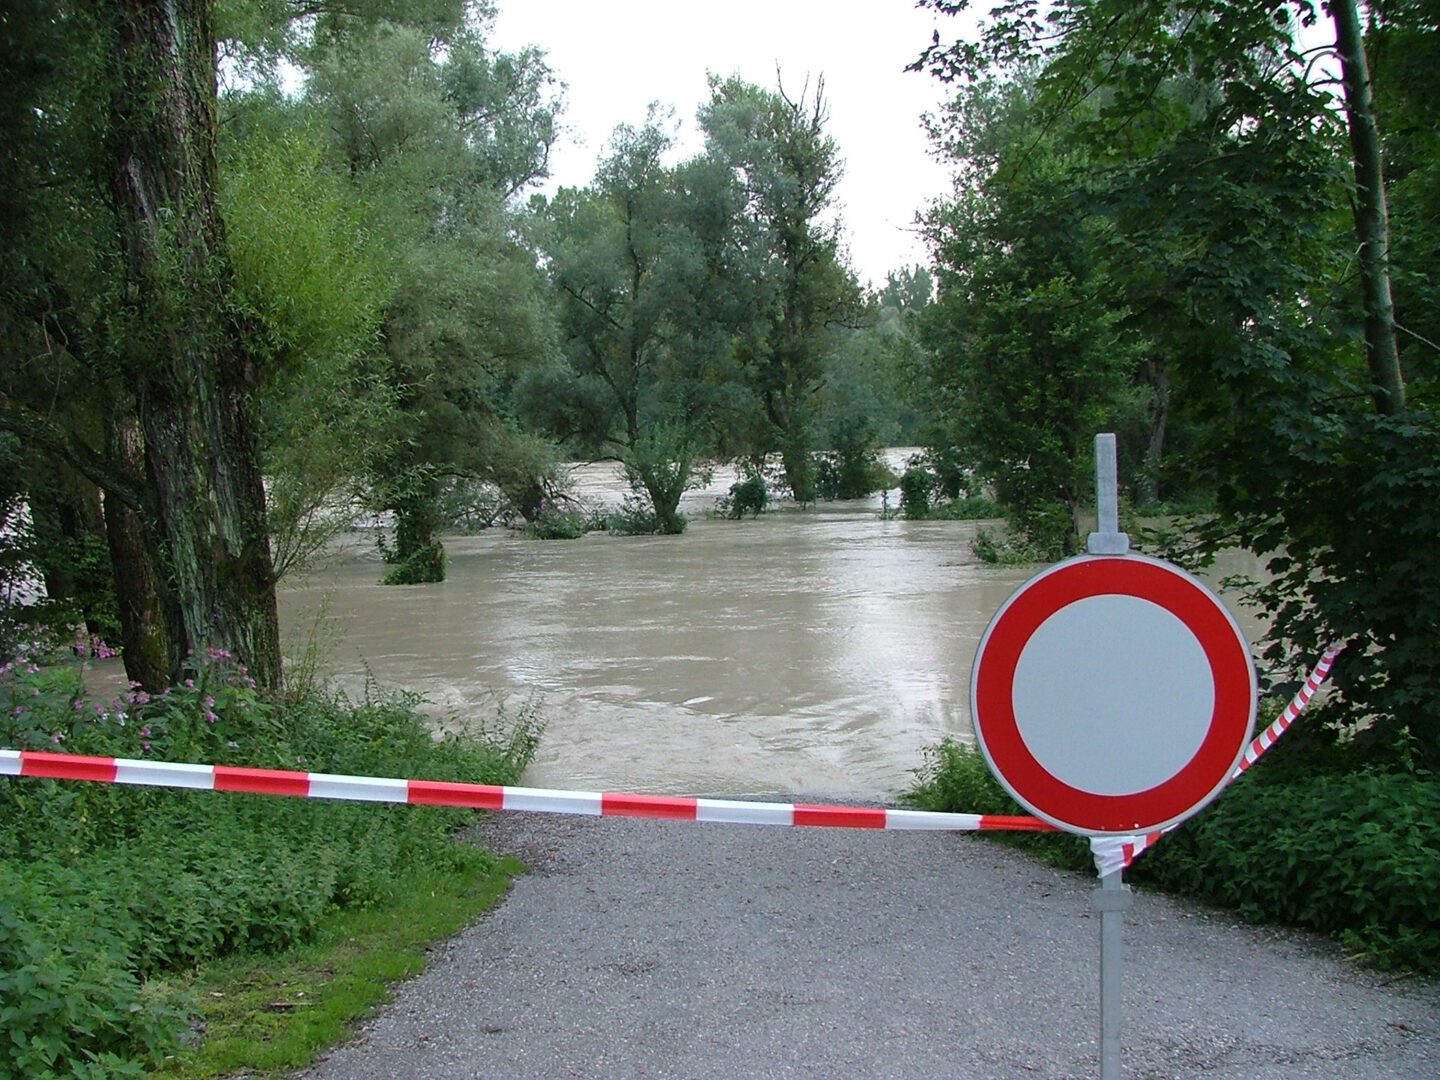 A red and white sign is near the water